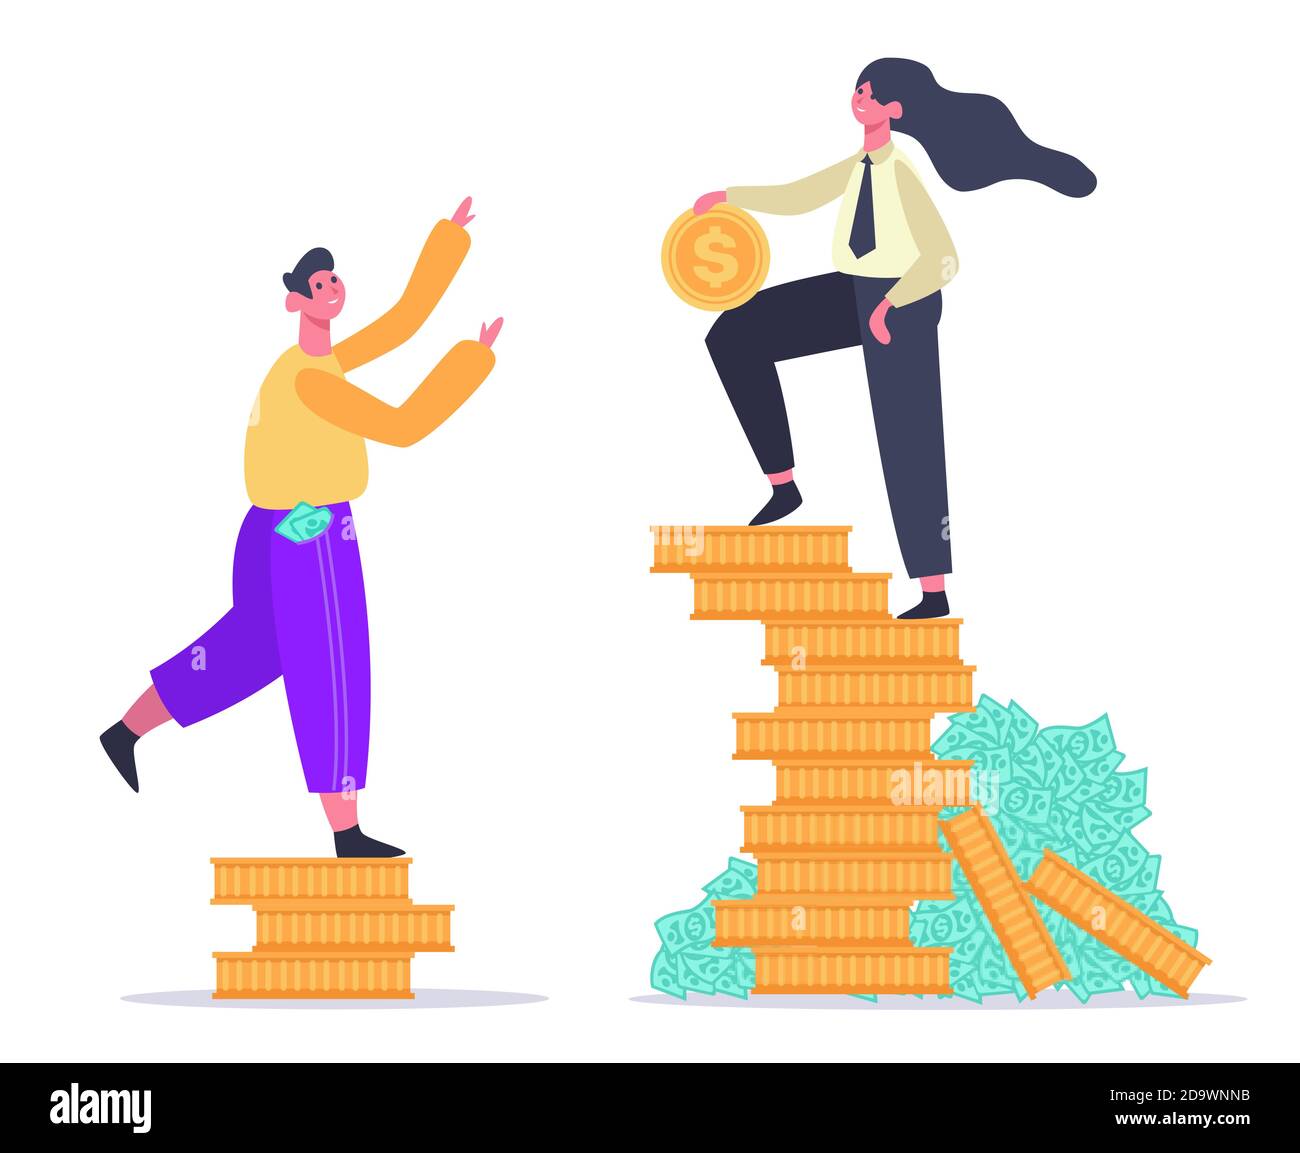 Salary inequality. Gender gap, economic classes inequality, male and female on money stack. Social difference, injustice vector illustration Stock Vector